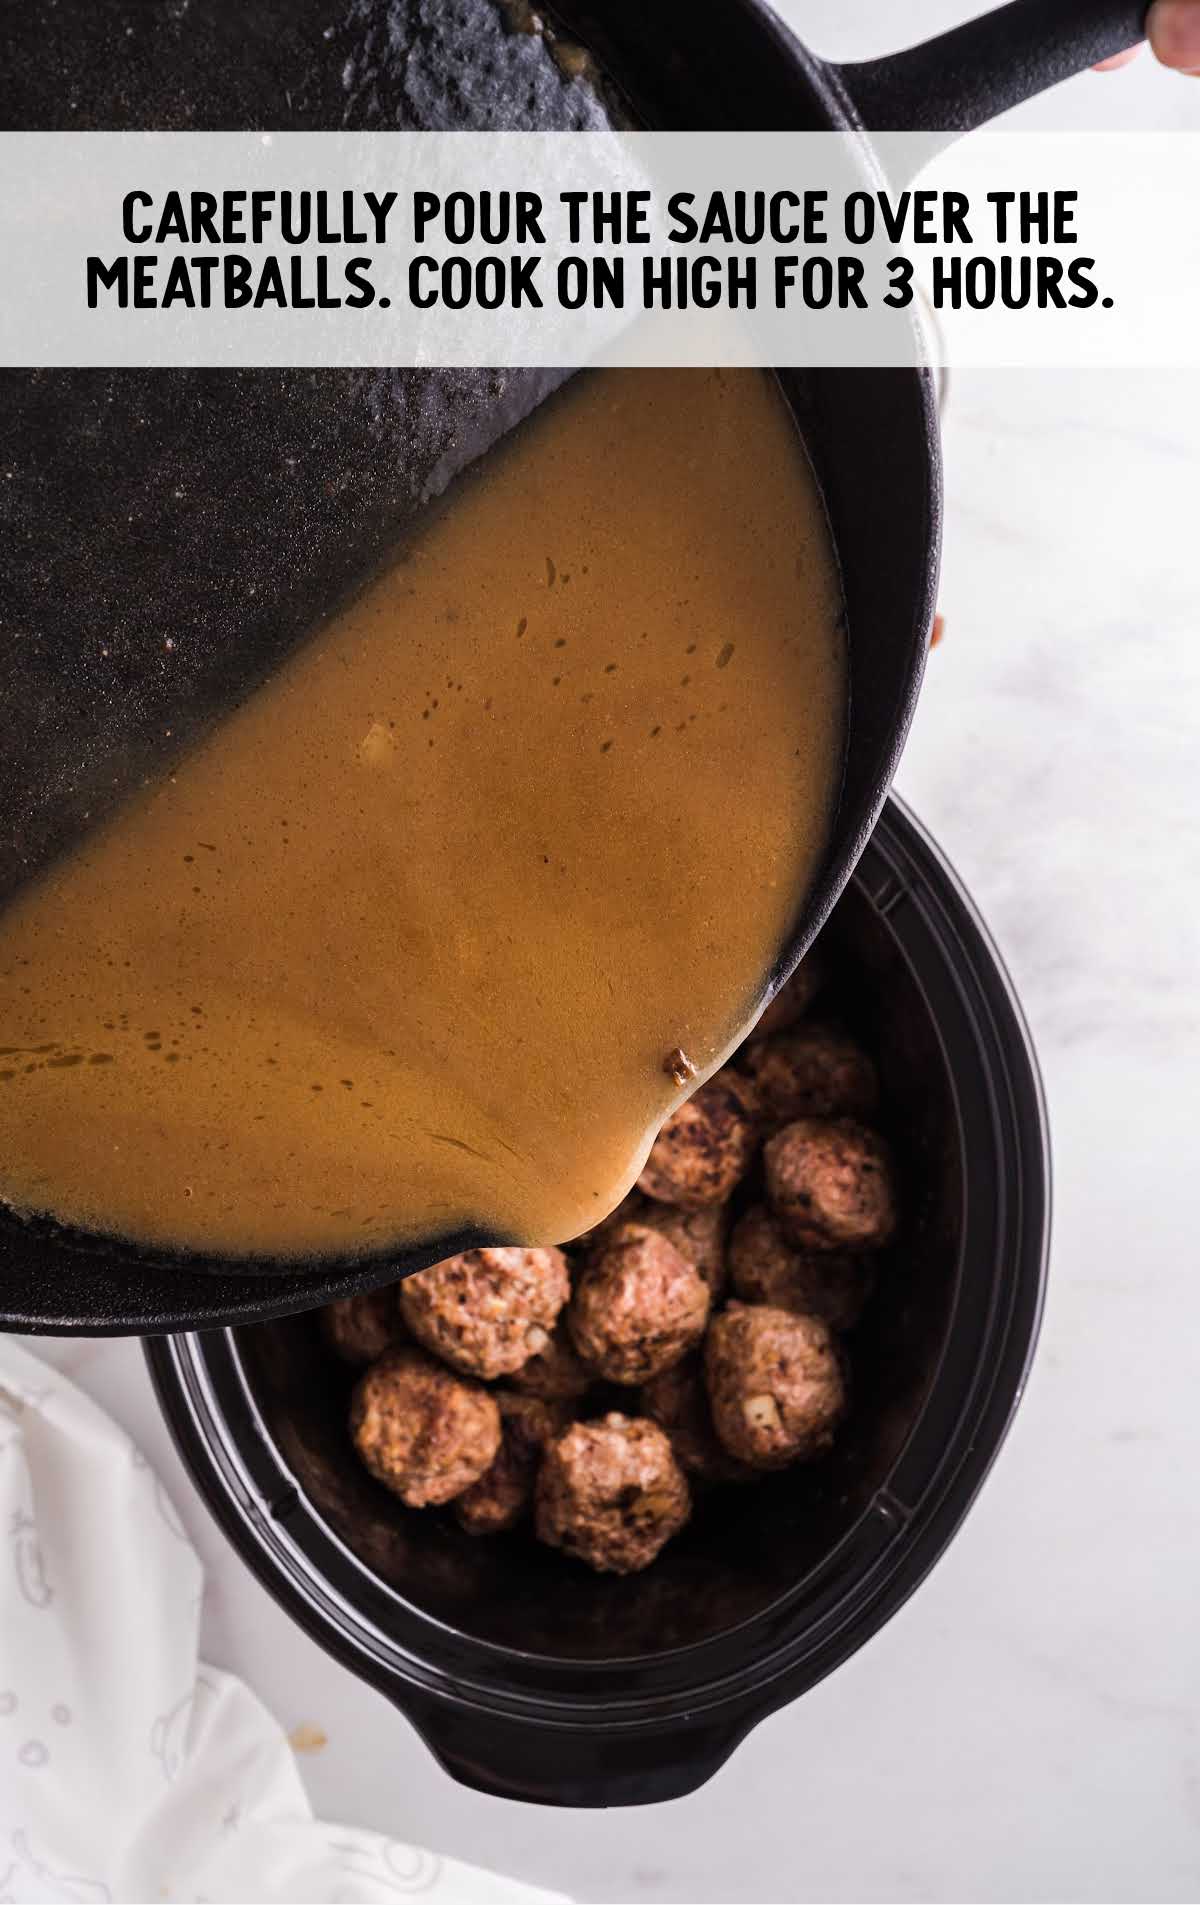 sauce poured over the cooked meatballs in a crockpot